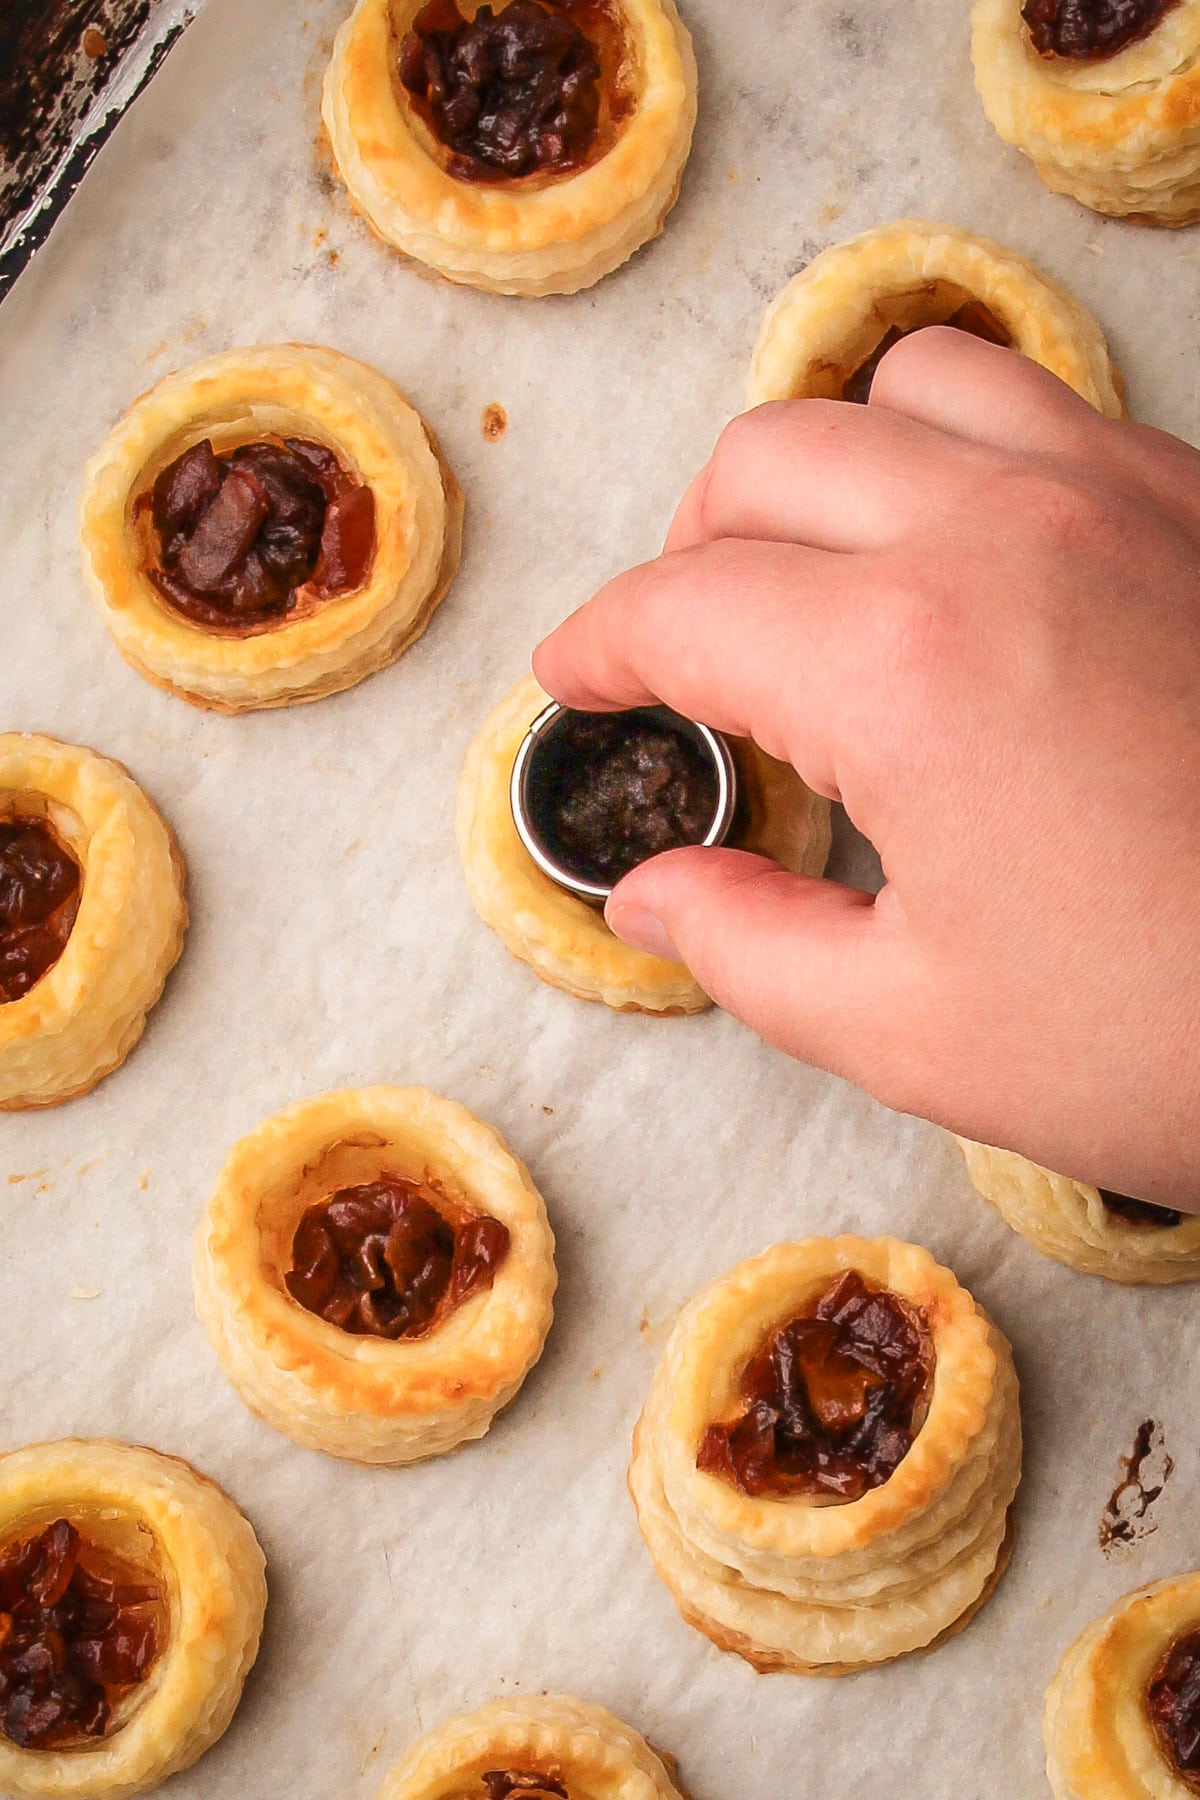 Pushing the baked puff pastry down to make room for the fig and goat cheese.